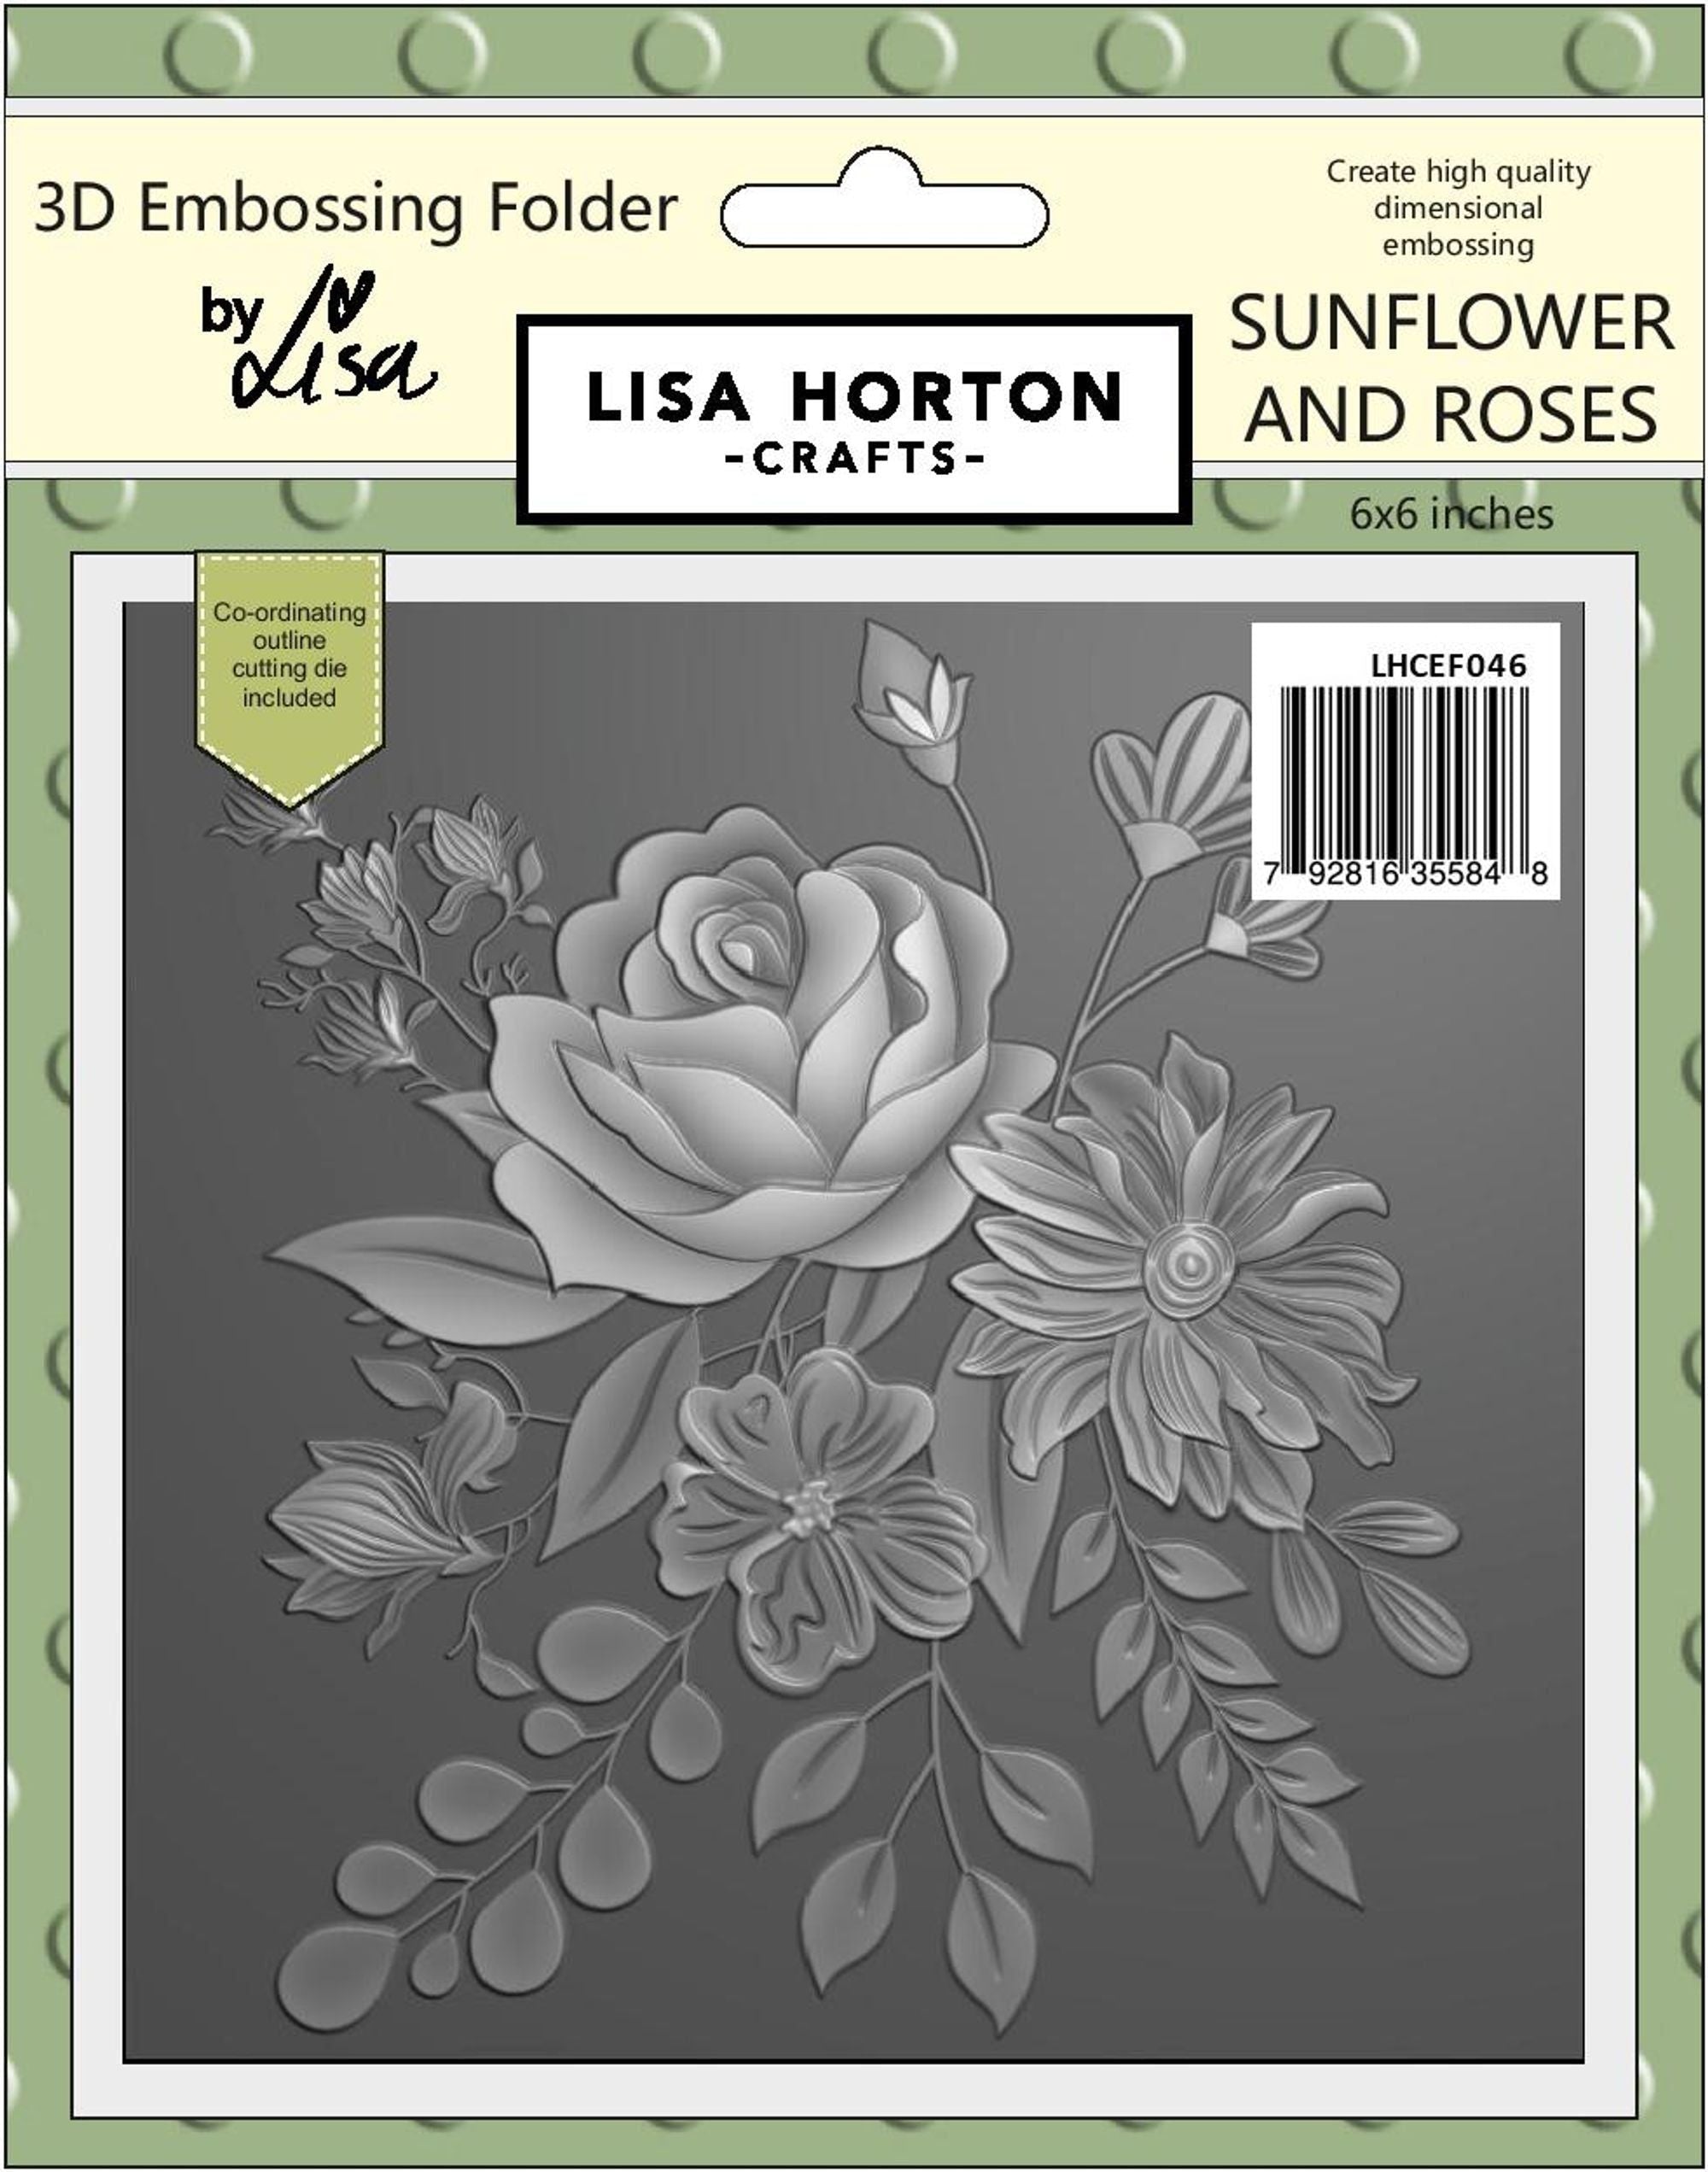 Sunflowers And Roses 6x6 3D Embossing Folder With Cutting Die